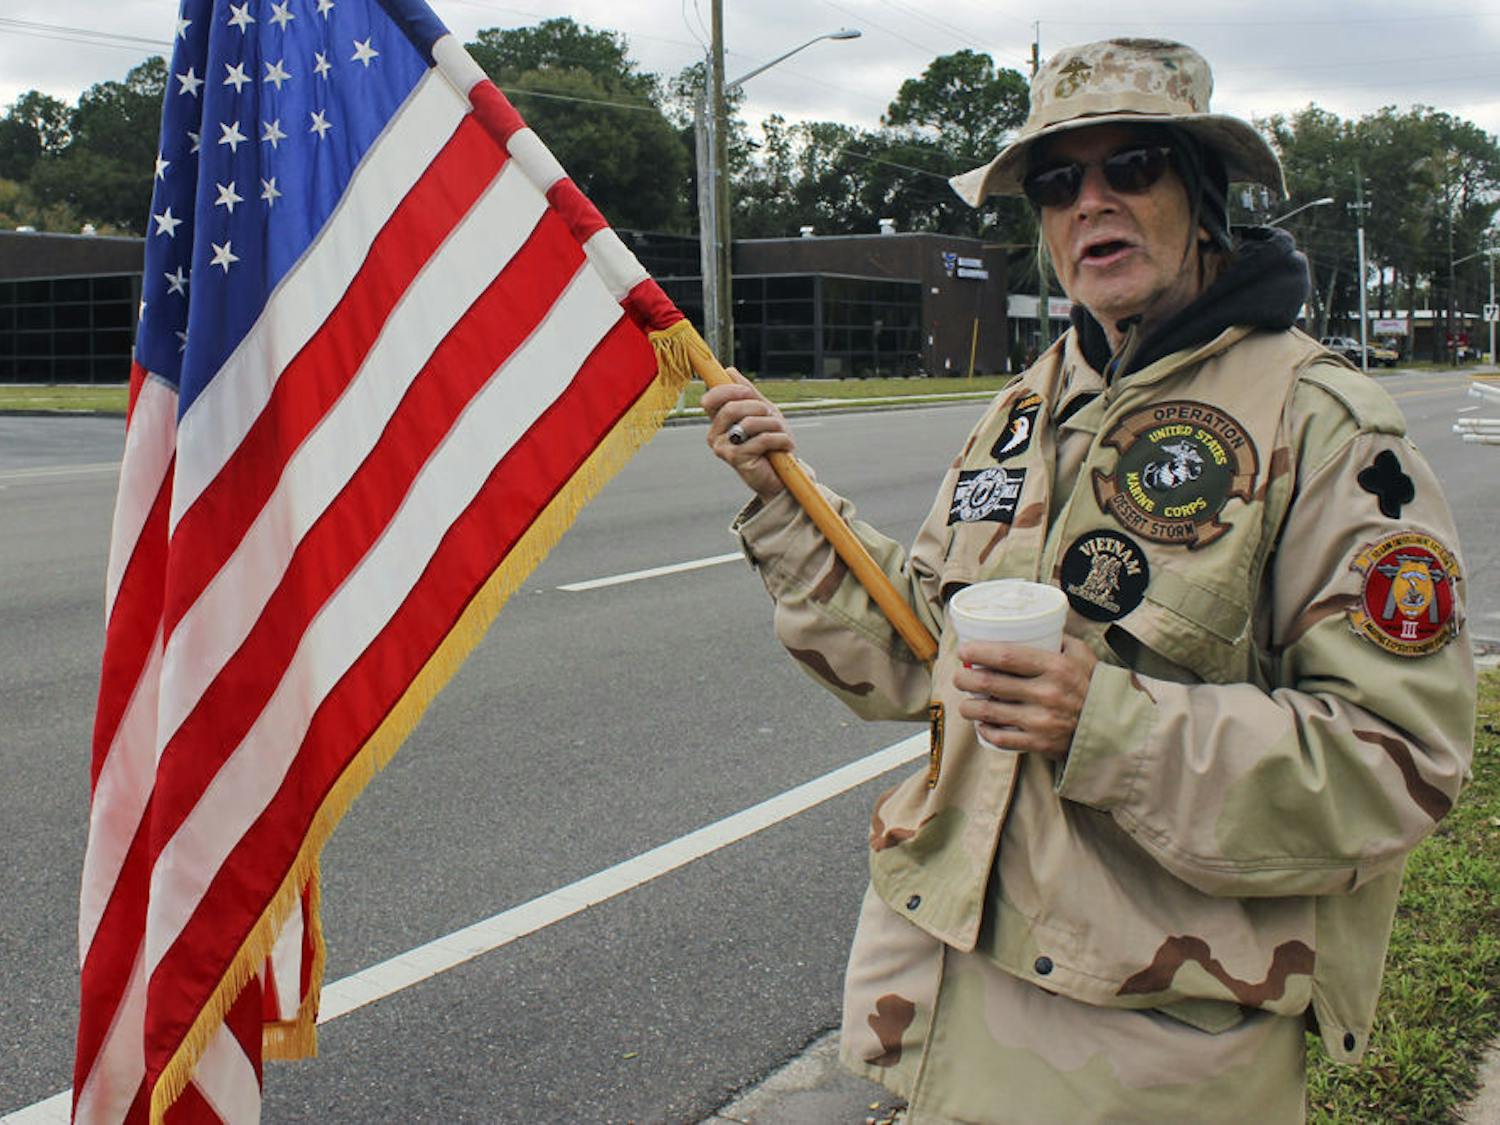 Cody Anderson, a member of the Military Support Group of Alachua County, holds a flag during the protest against Clock Restaurant on Saturday morning. “I felt it was important to support Mr. Woods,” Anderson said. “I felt that the way he was treated was not only illegal but immoral.”